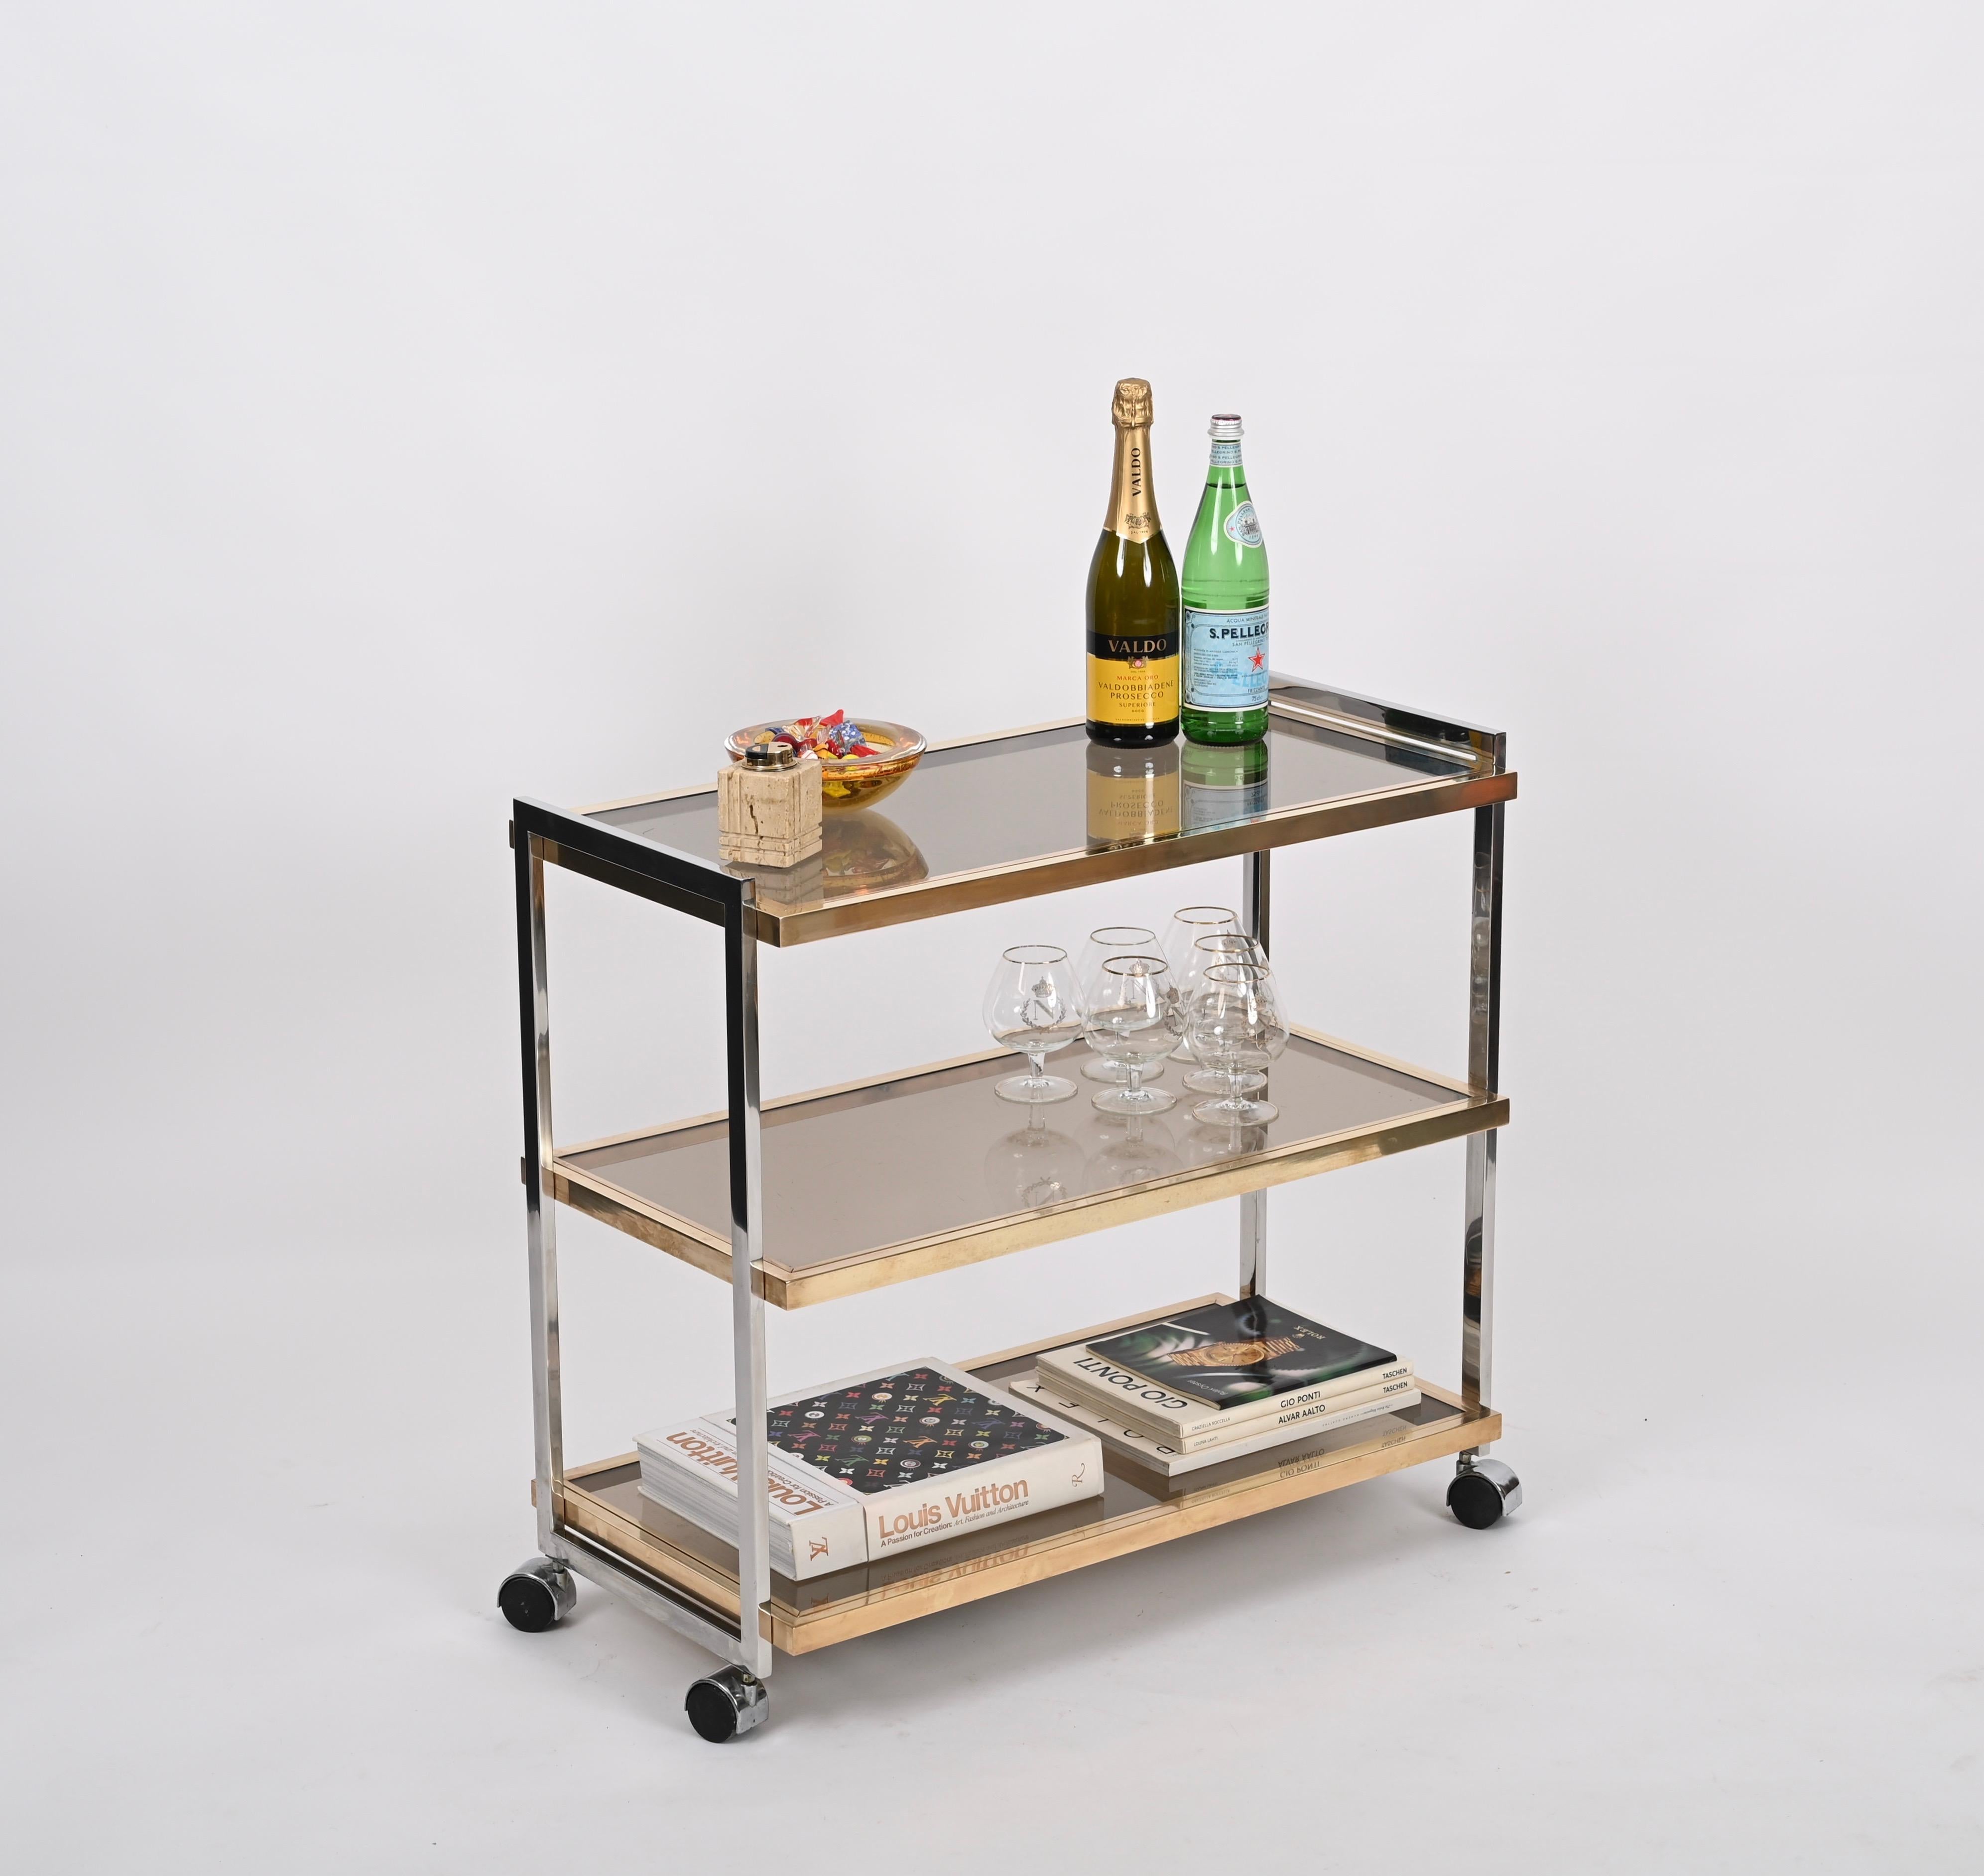 Gorgeous trolley bar cart fully made in solid brass and chromed metal. This wonderful and rare three level bar cart was designed by Romeo Rega and produced in Italy during the 1970s.

Each shelf of this sturdy serving table can be removed. The